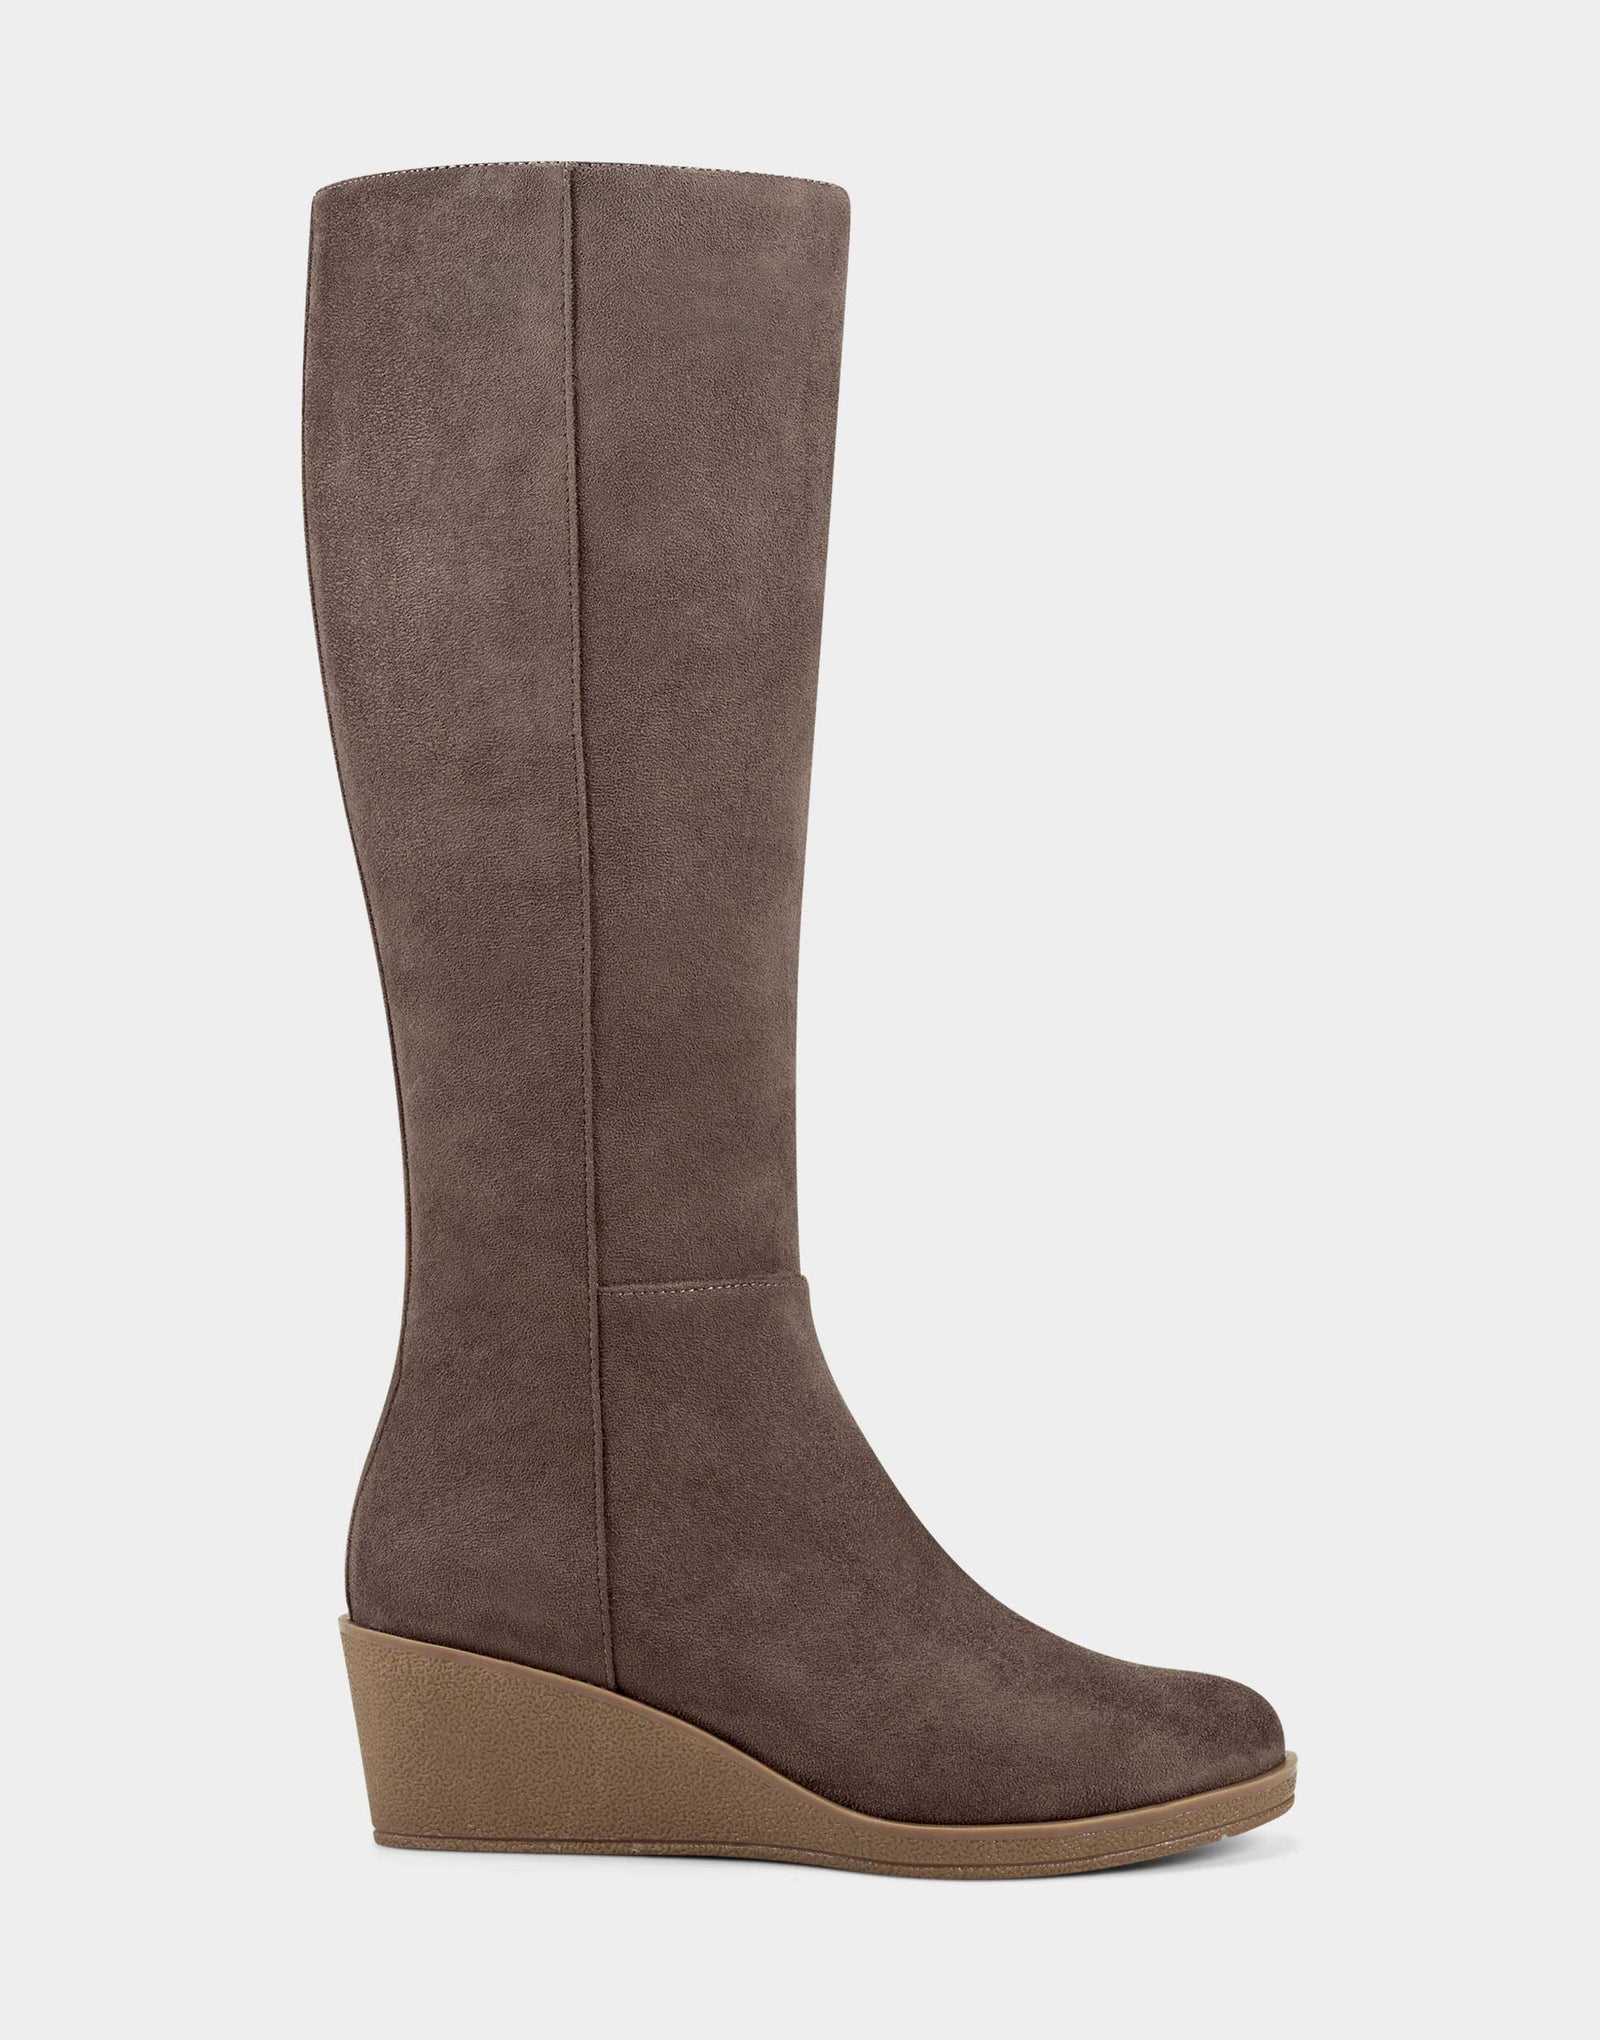 Women's Tall Boot in Taupe